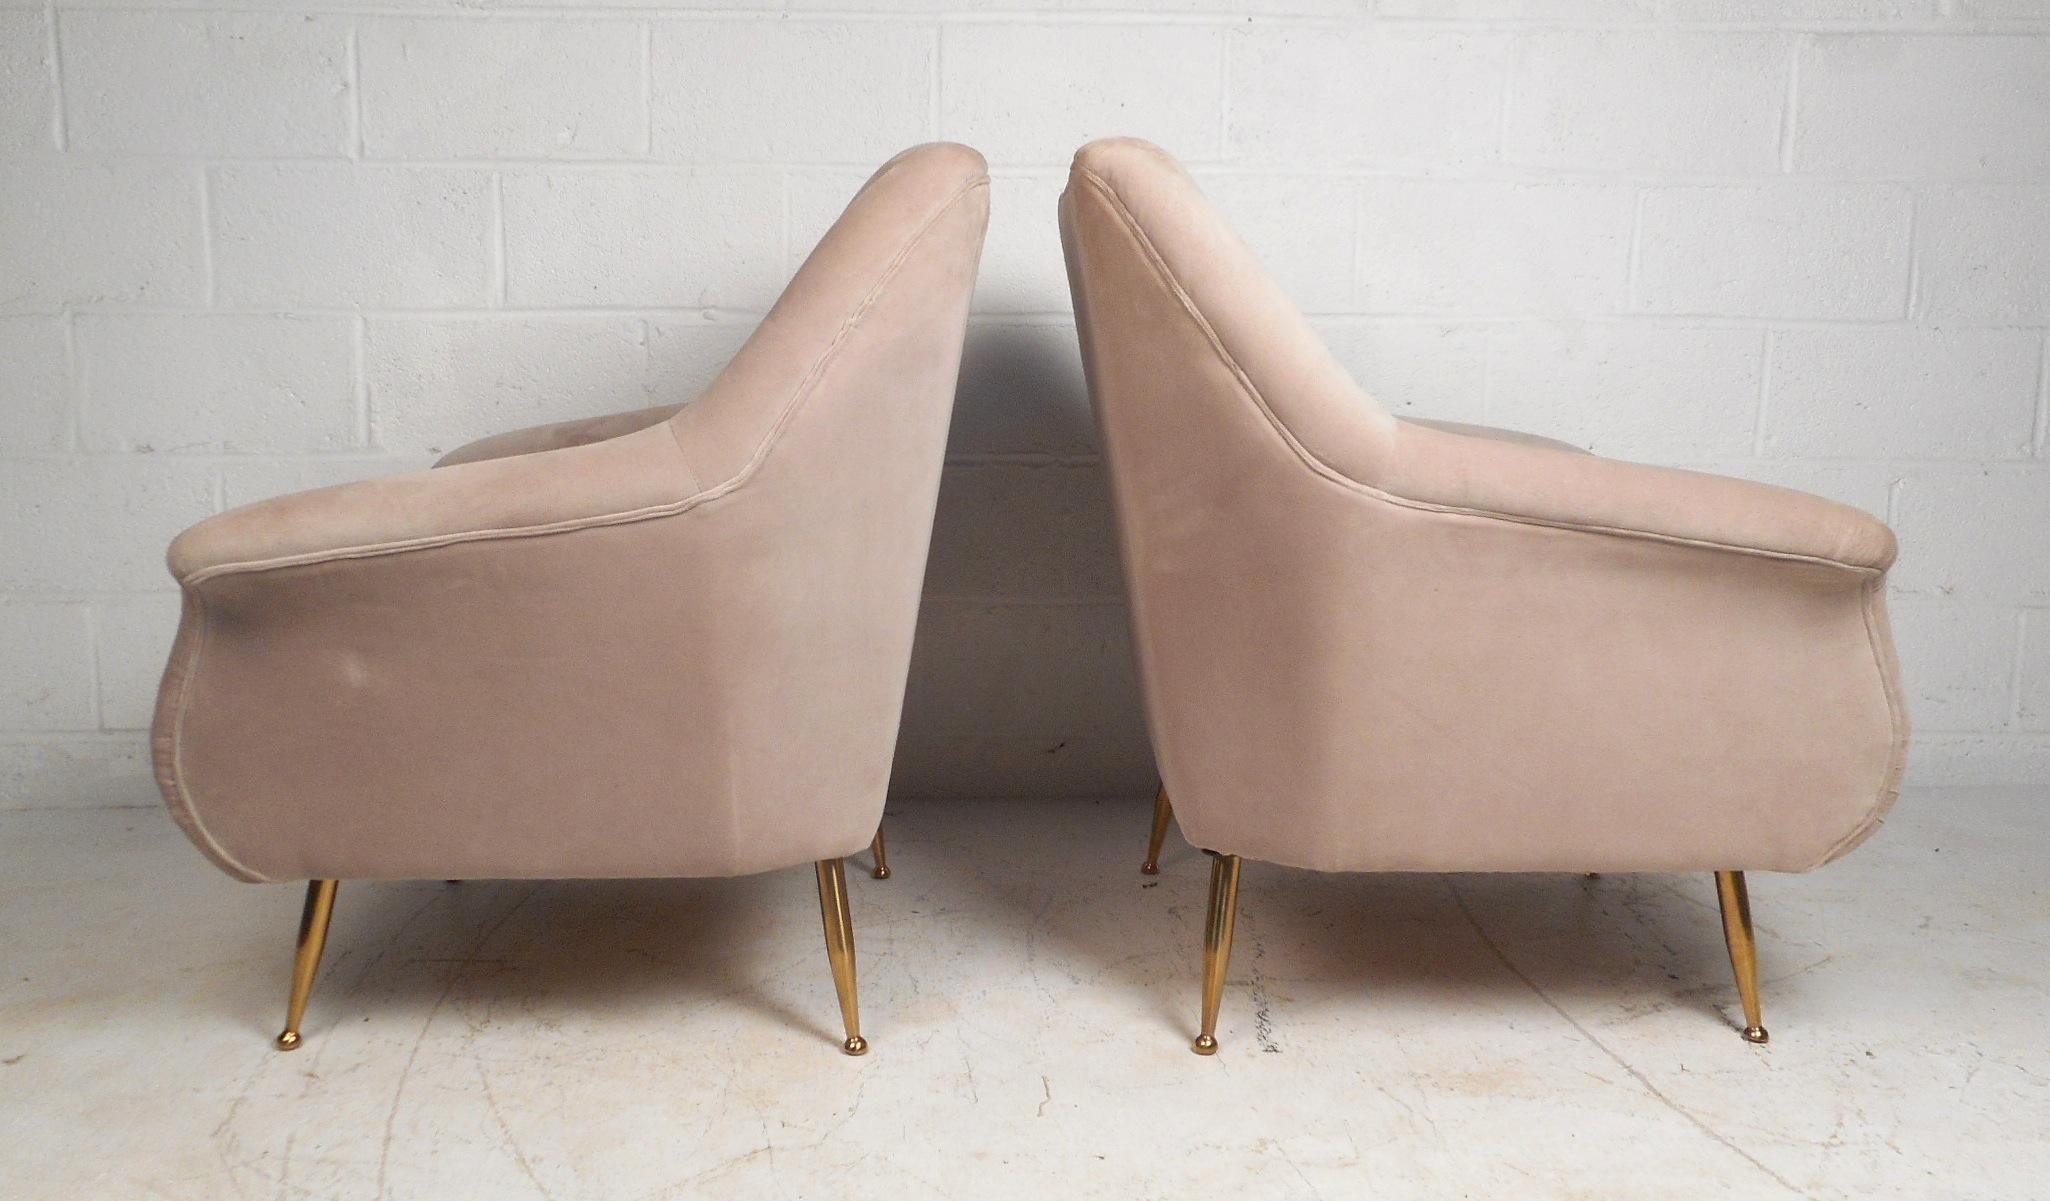 Pair of Contemporary Modern Italian Style Lounge Chairs In Good Condition For Sale In Brooklyn, NY